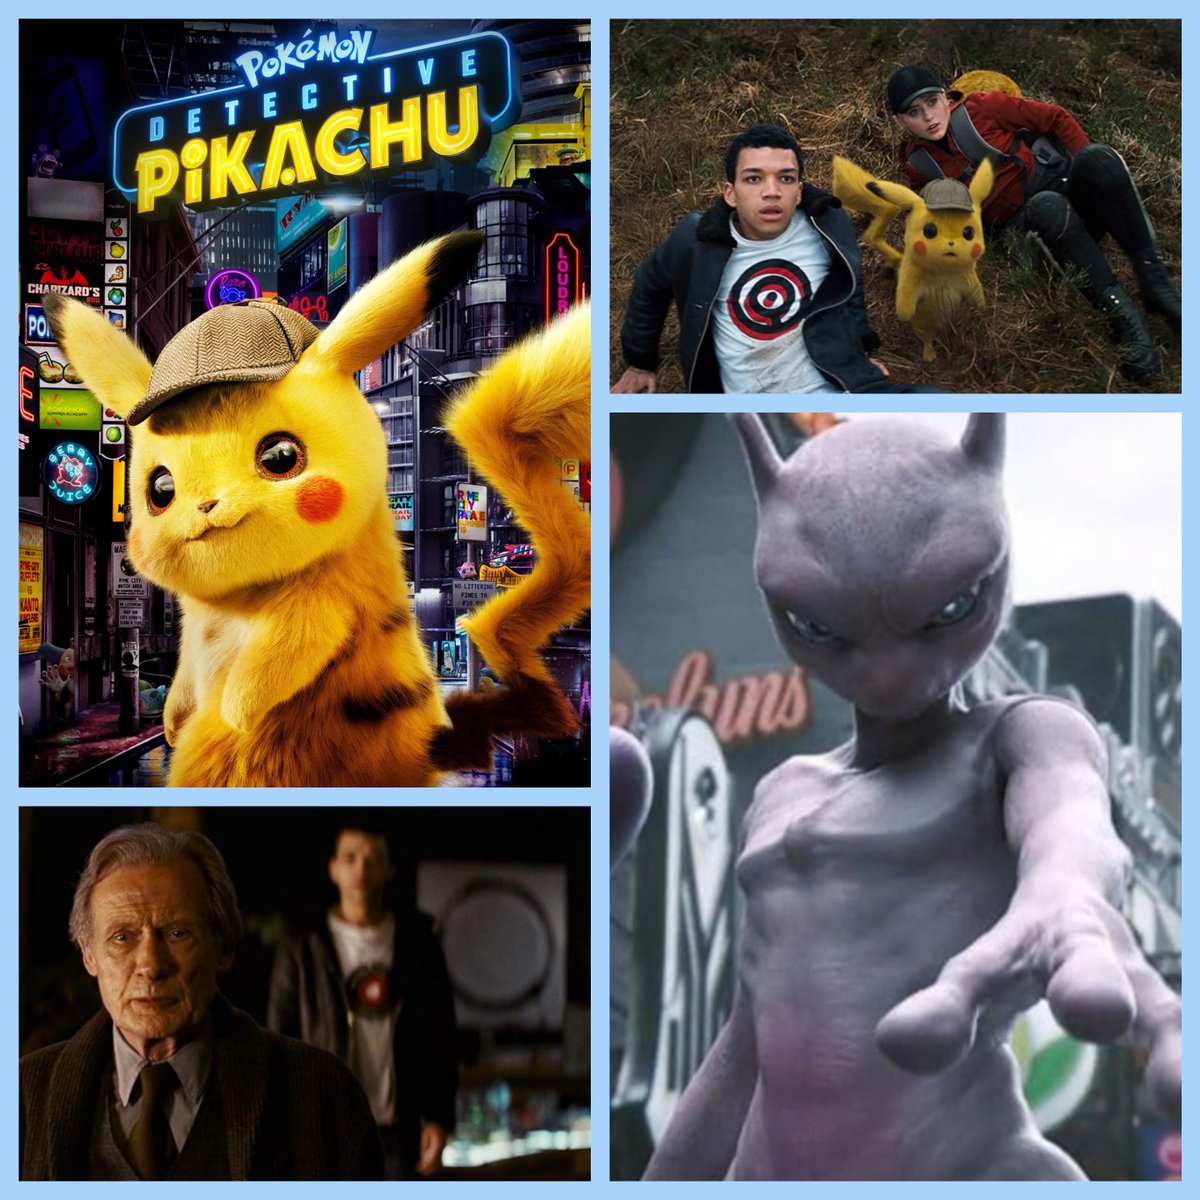 #MoviesAndSeriesBasedOnGames
#FilmX #TVX 

#PokémonDetectivePikachu (2019)

In a world where people collect Pokémon to do battle, a boy comes across an intelligent talking Pikachu who seeks to be a detective.